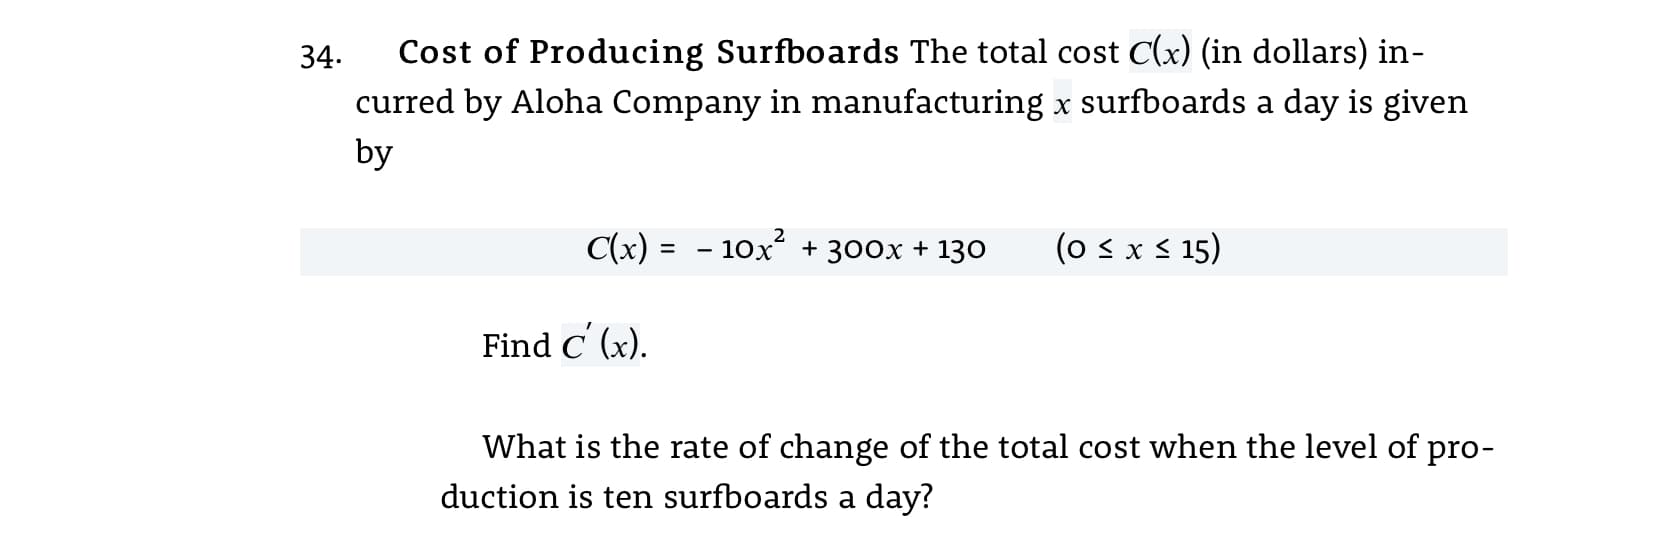 34.
Cost of Producing Surfboards The total cost C(x) (in dollars) in-
curred by Aloha Company in manufacturing x surfboards a day is given
by
C(x) = - 10x + 300x + 130
(o s x s 15)
%3D
Find C' (x).
What is the rate of change of the total cost when the level of pro-
duction is ten surfboards a day?
